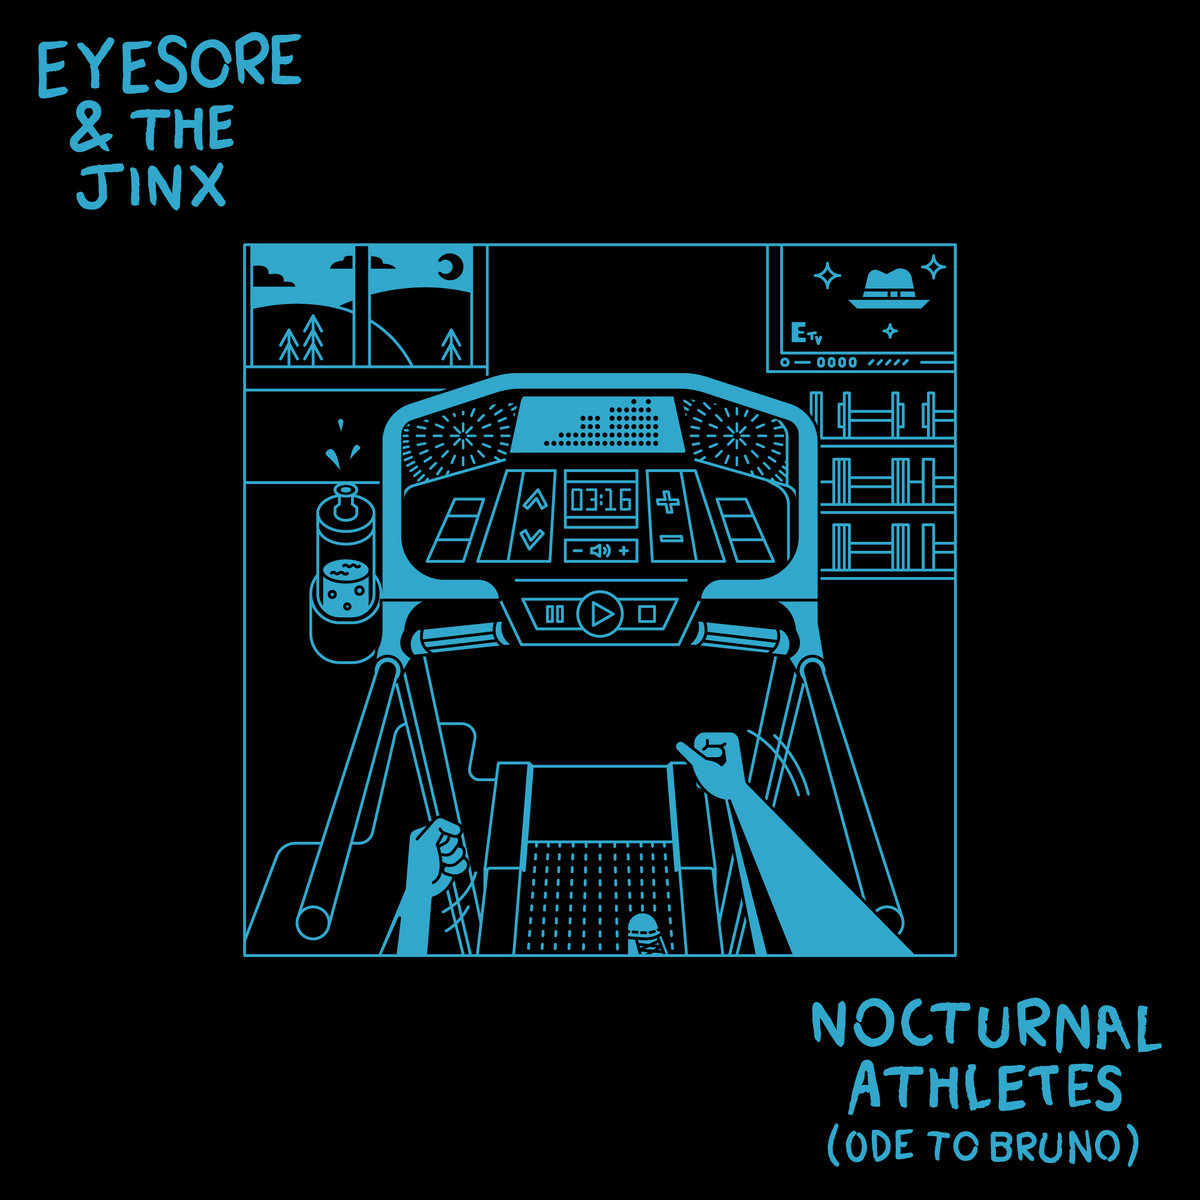 artwork for Nocturnal Athletes (Ode To Bruno) by Eyesore & The Jinx